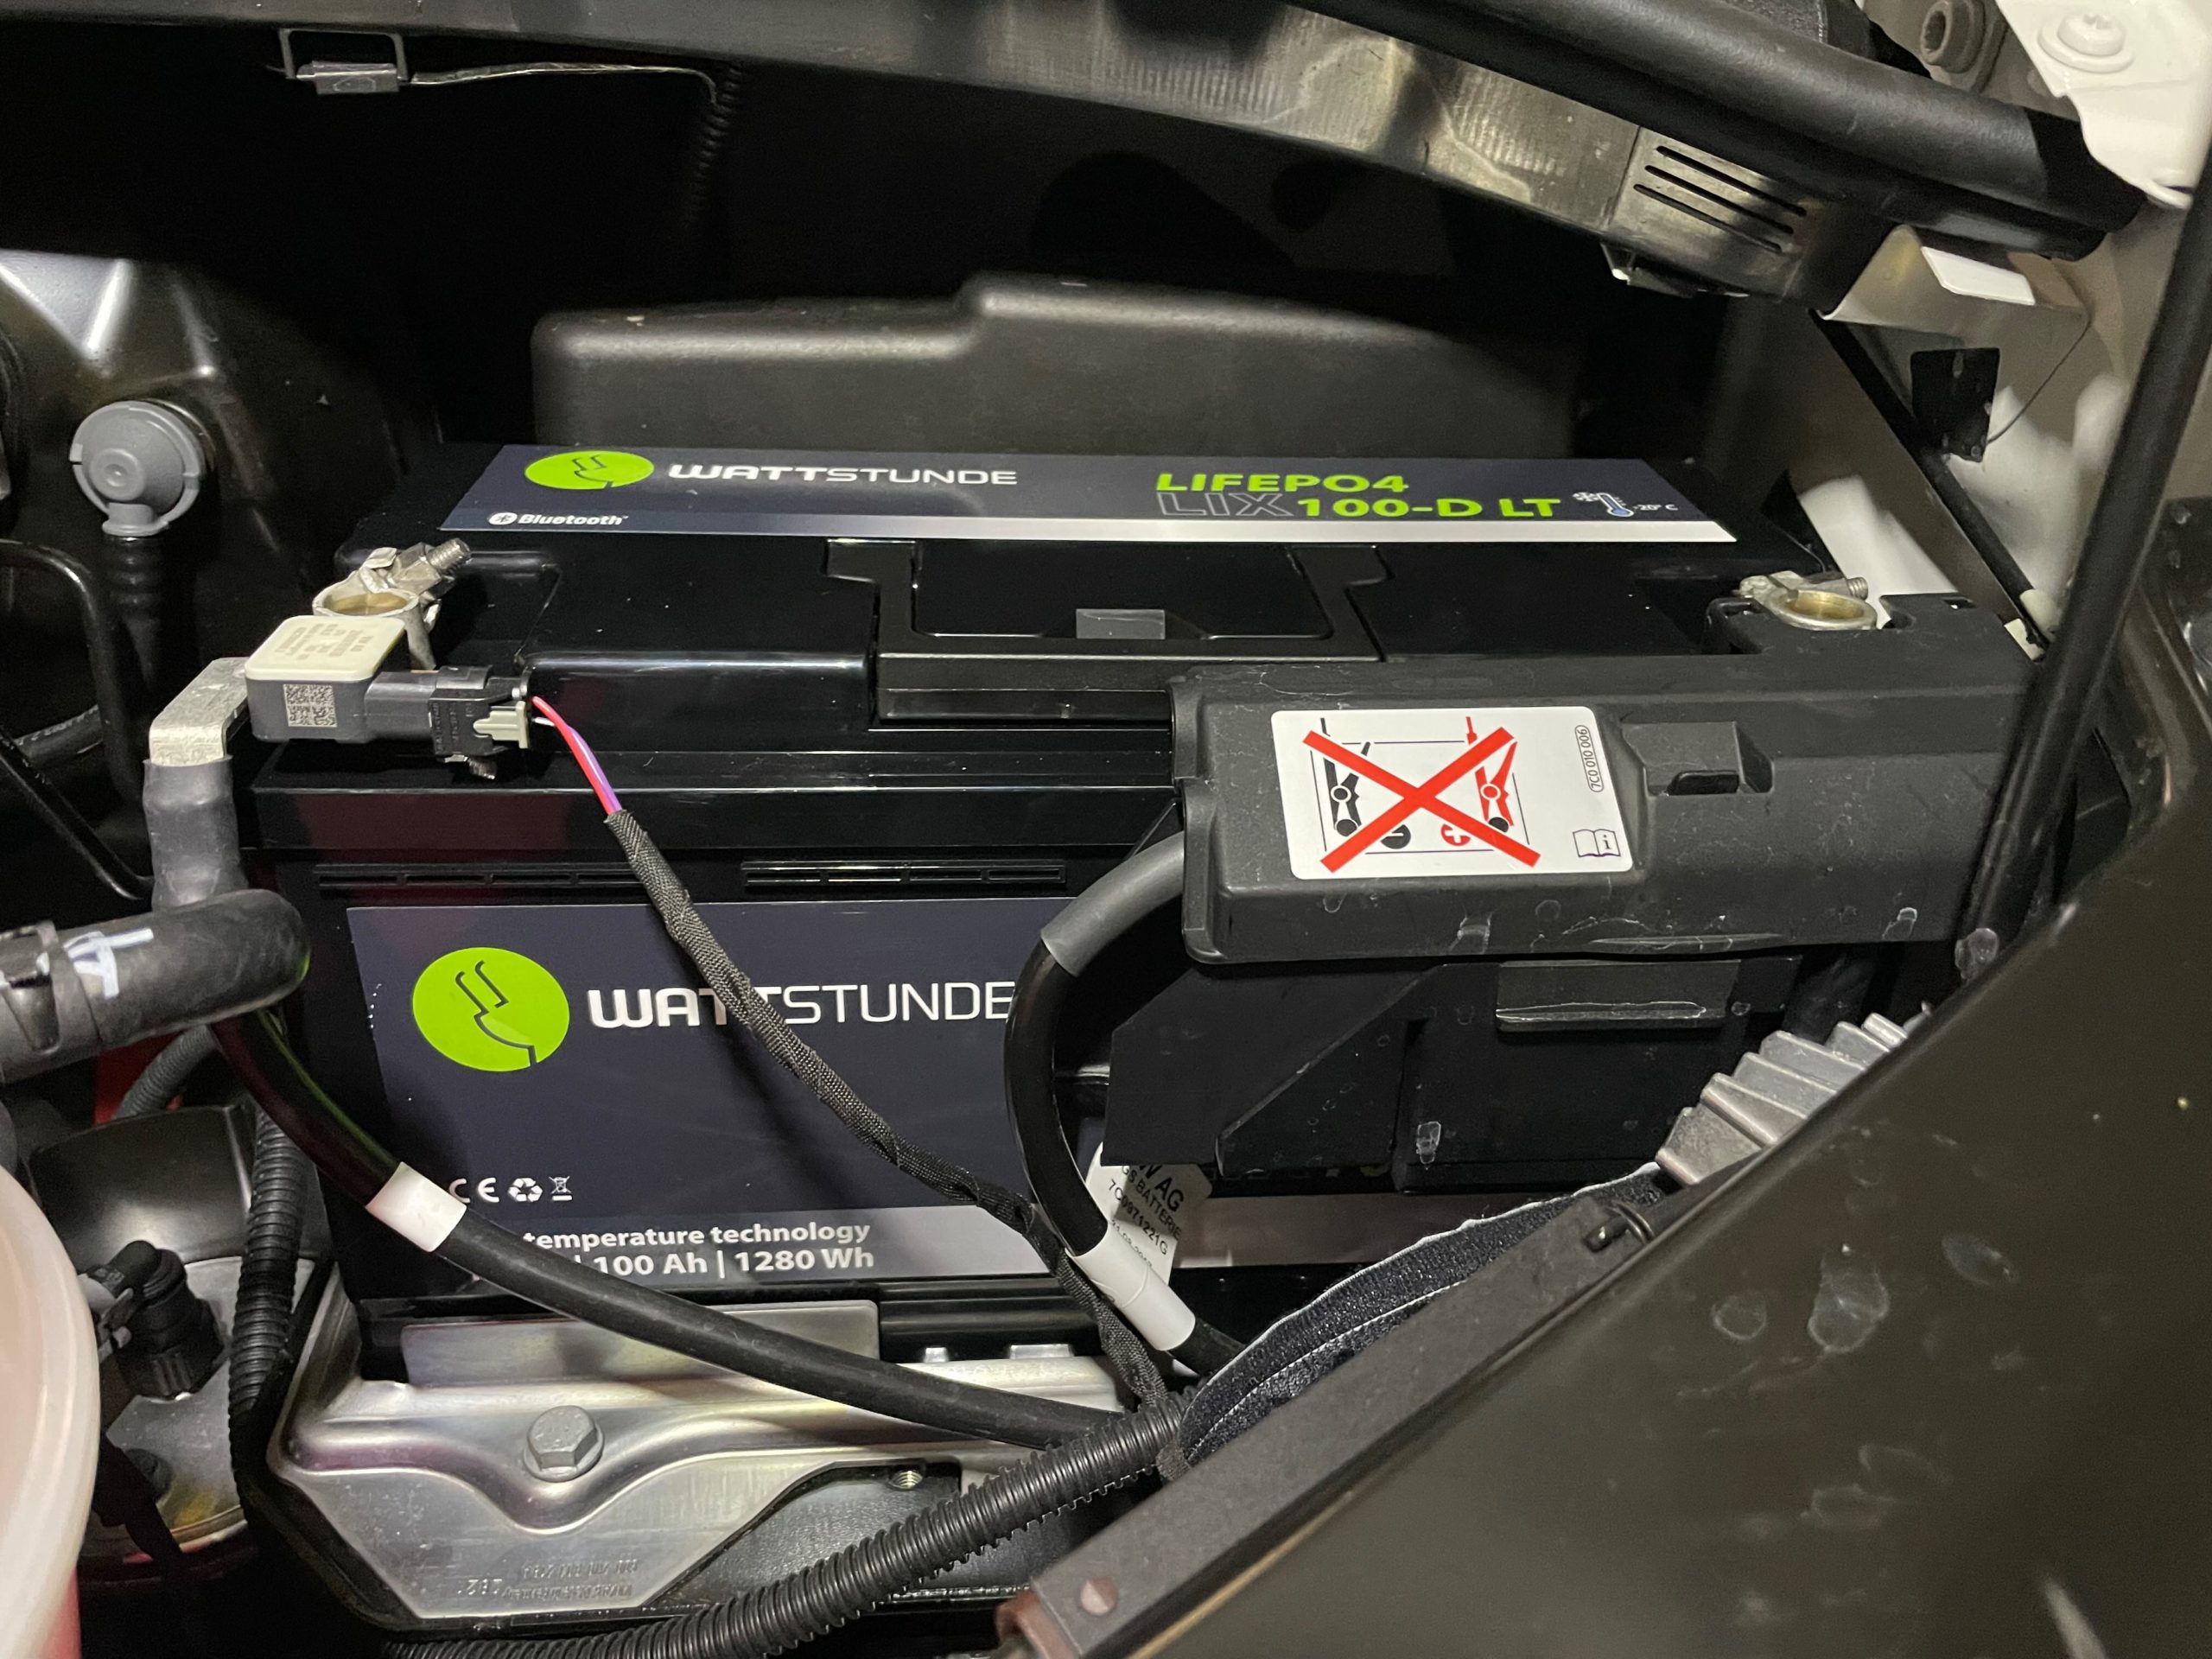 VW California leisure battery replacement